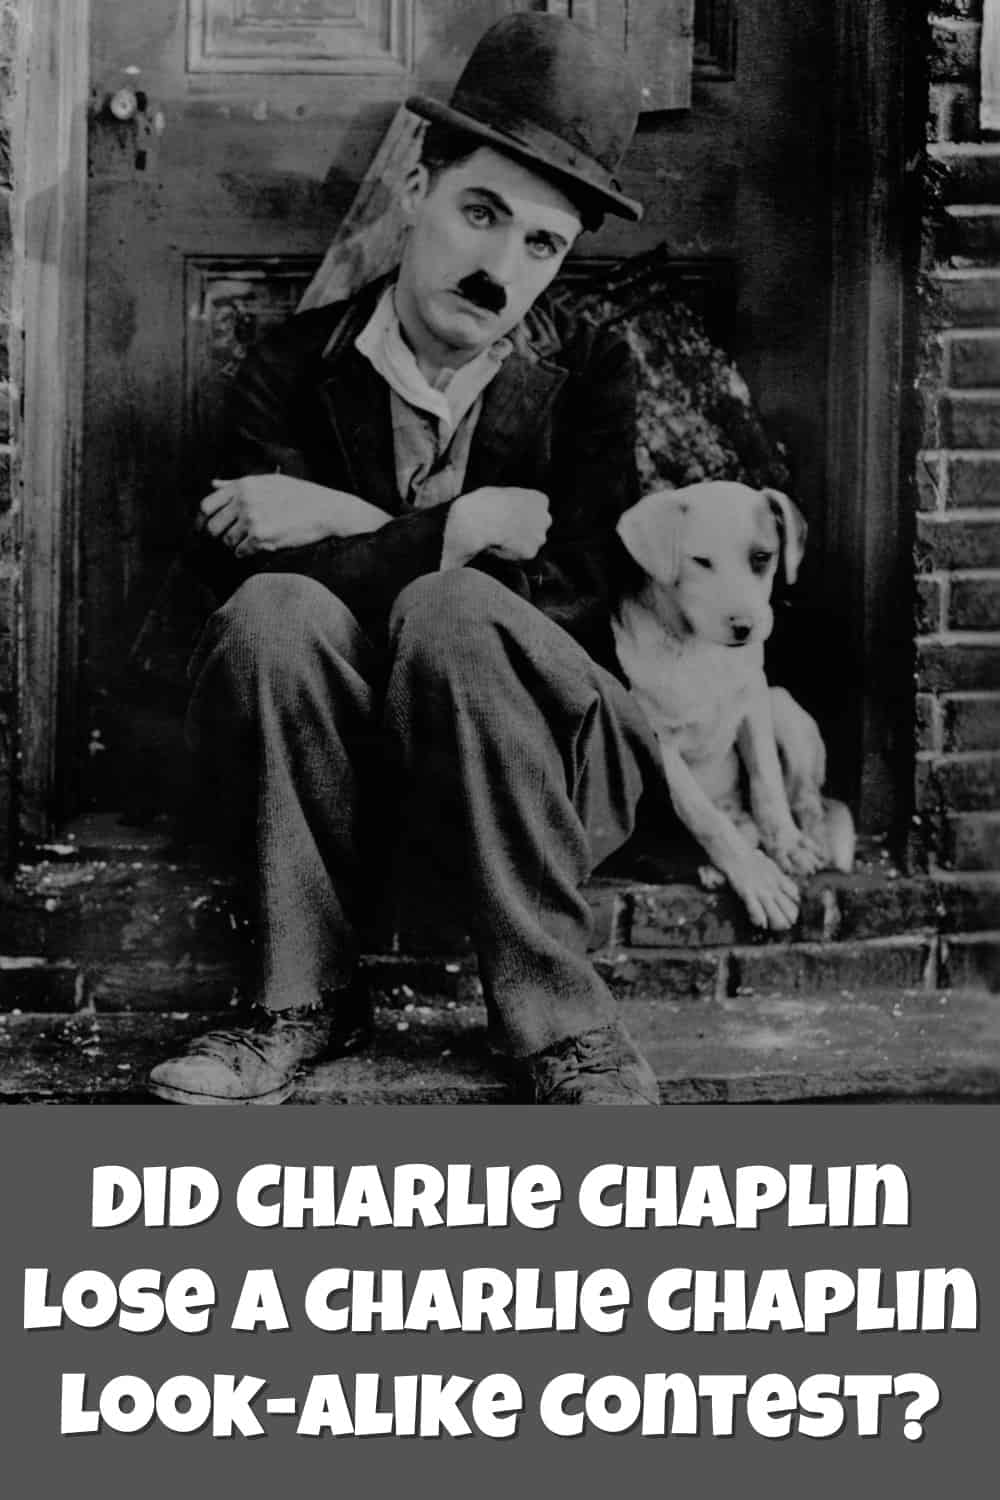 How Could Chaplin Lose A Charlie Chaplin Look-Alike Contest?